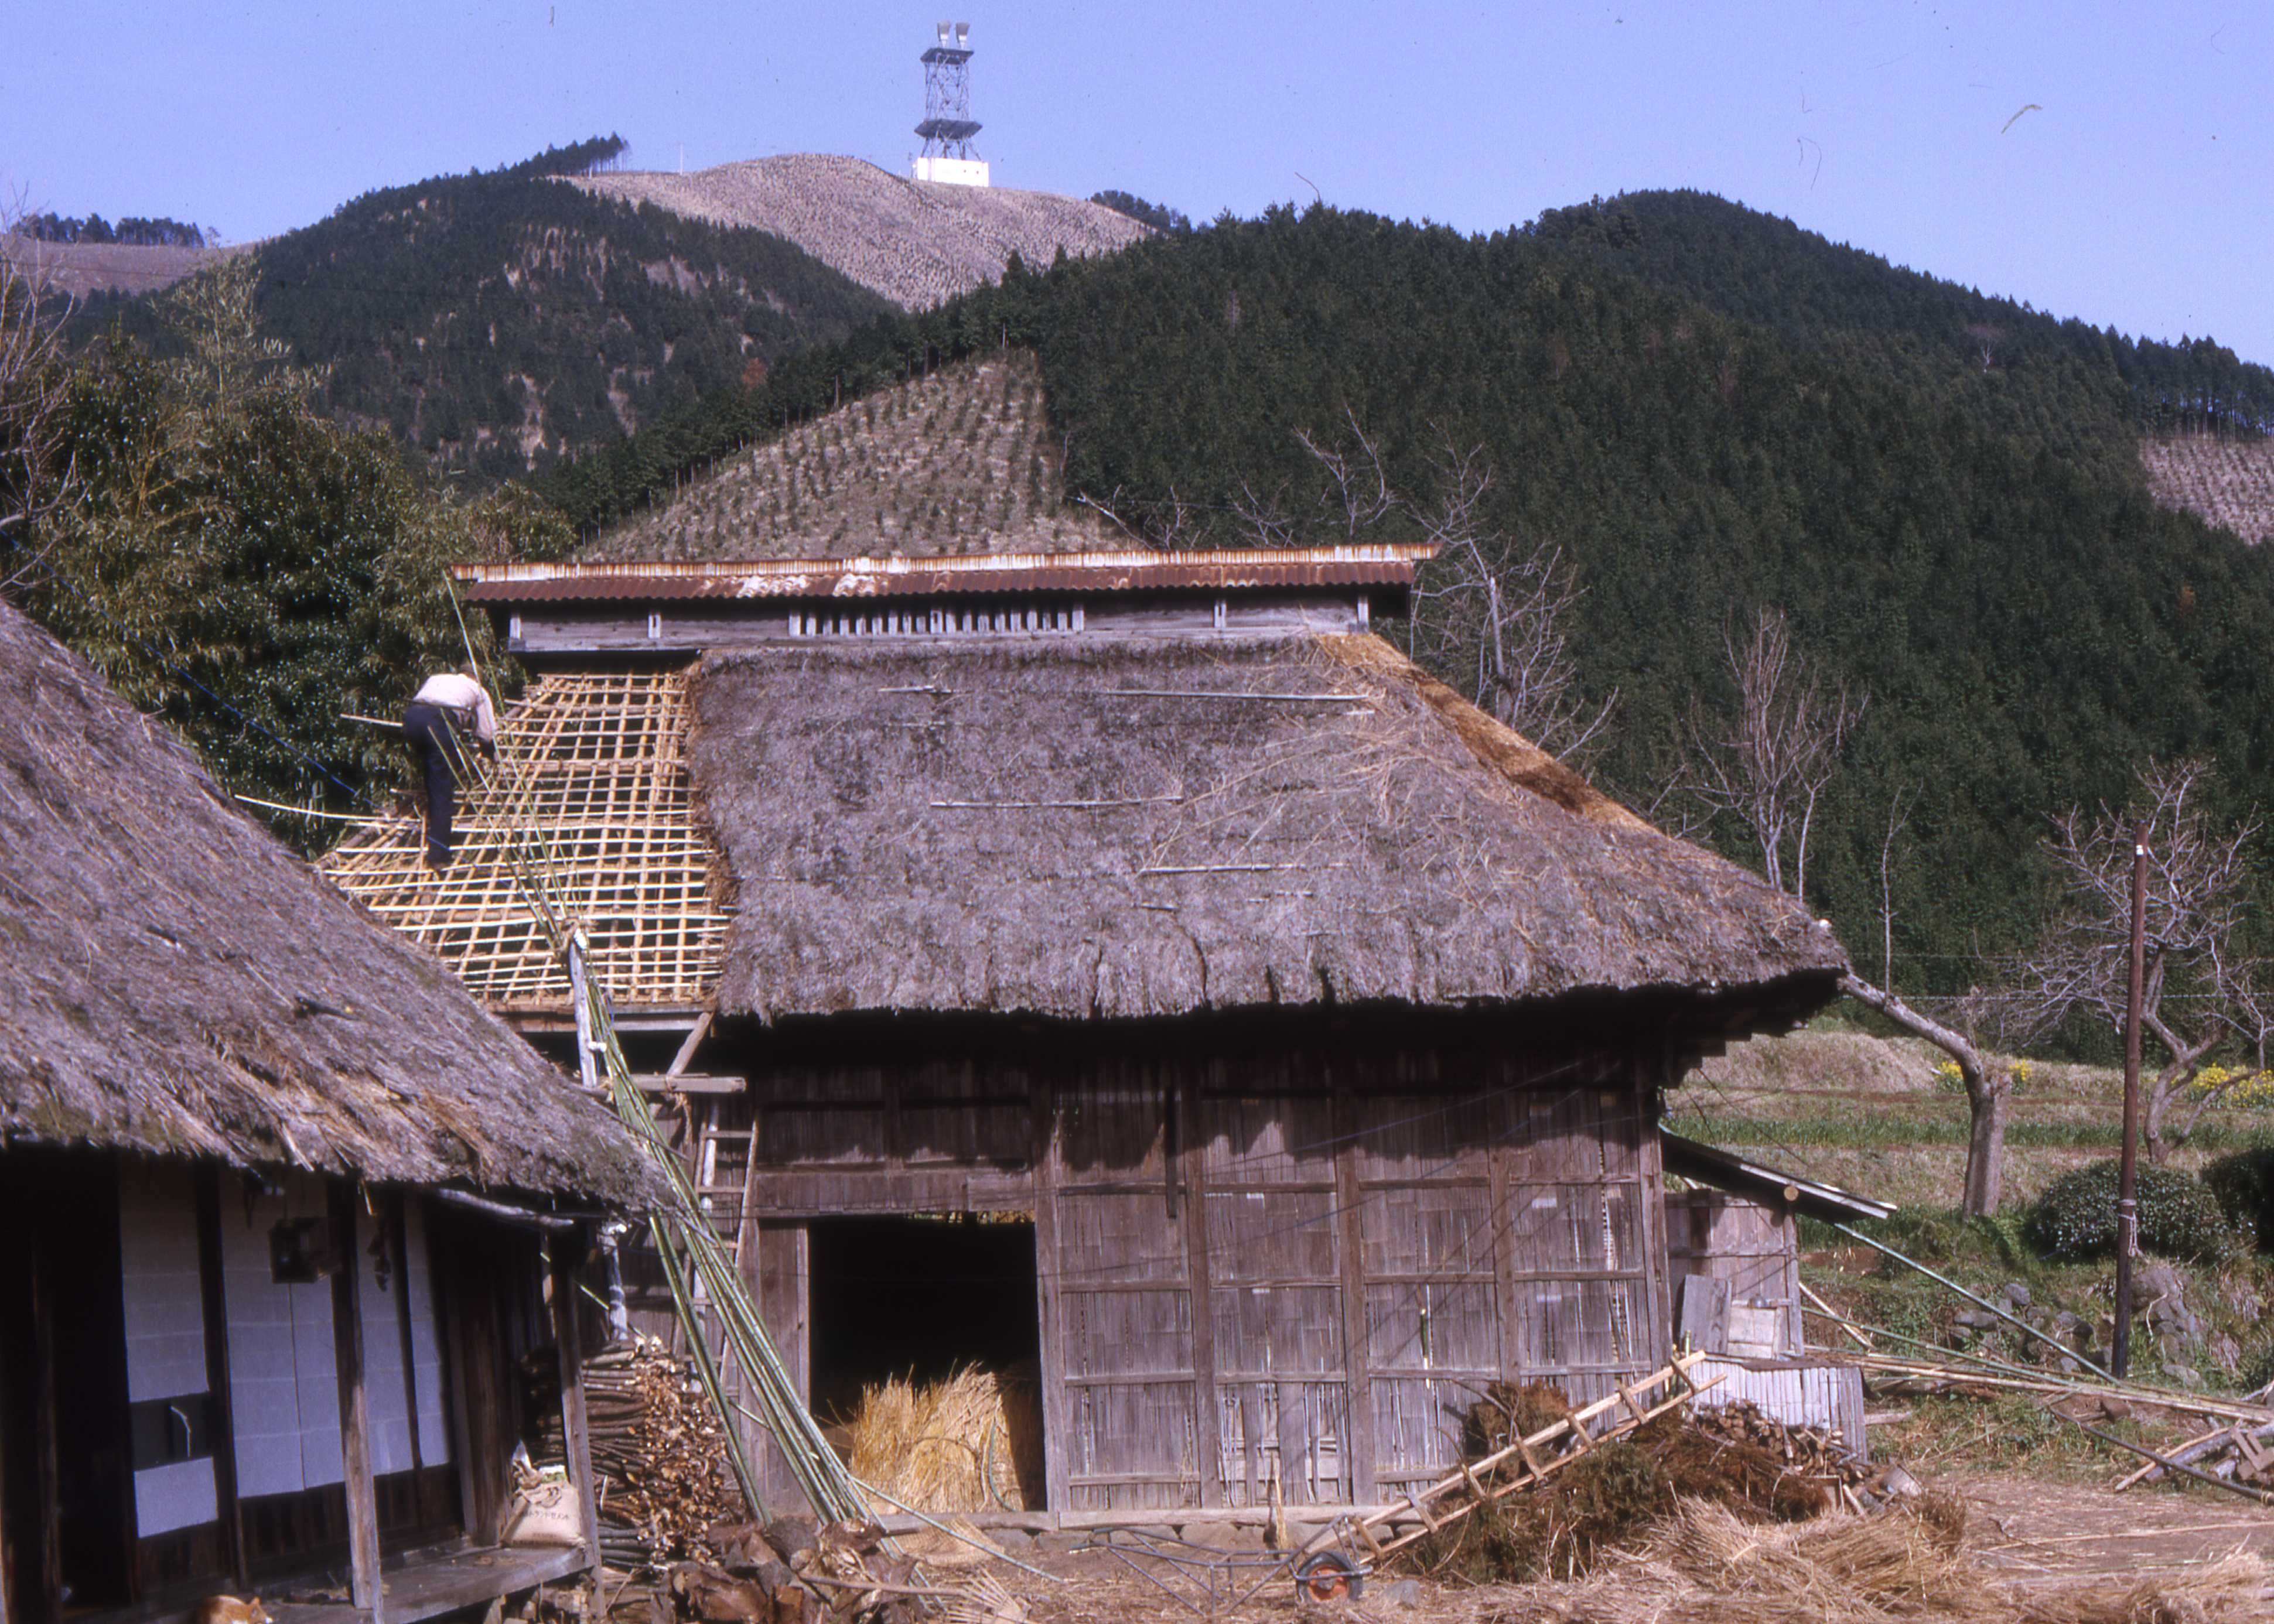 Thatching roof